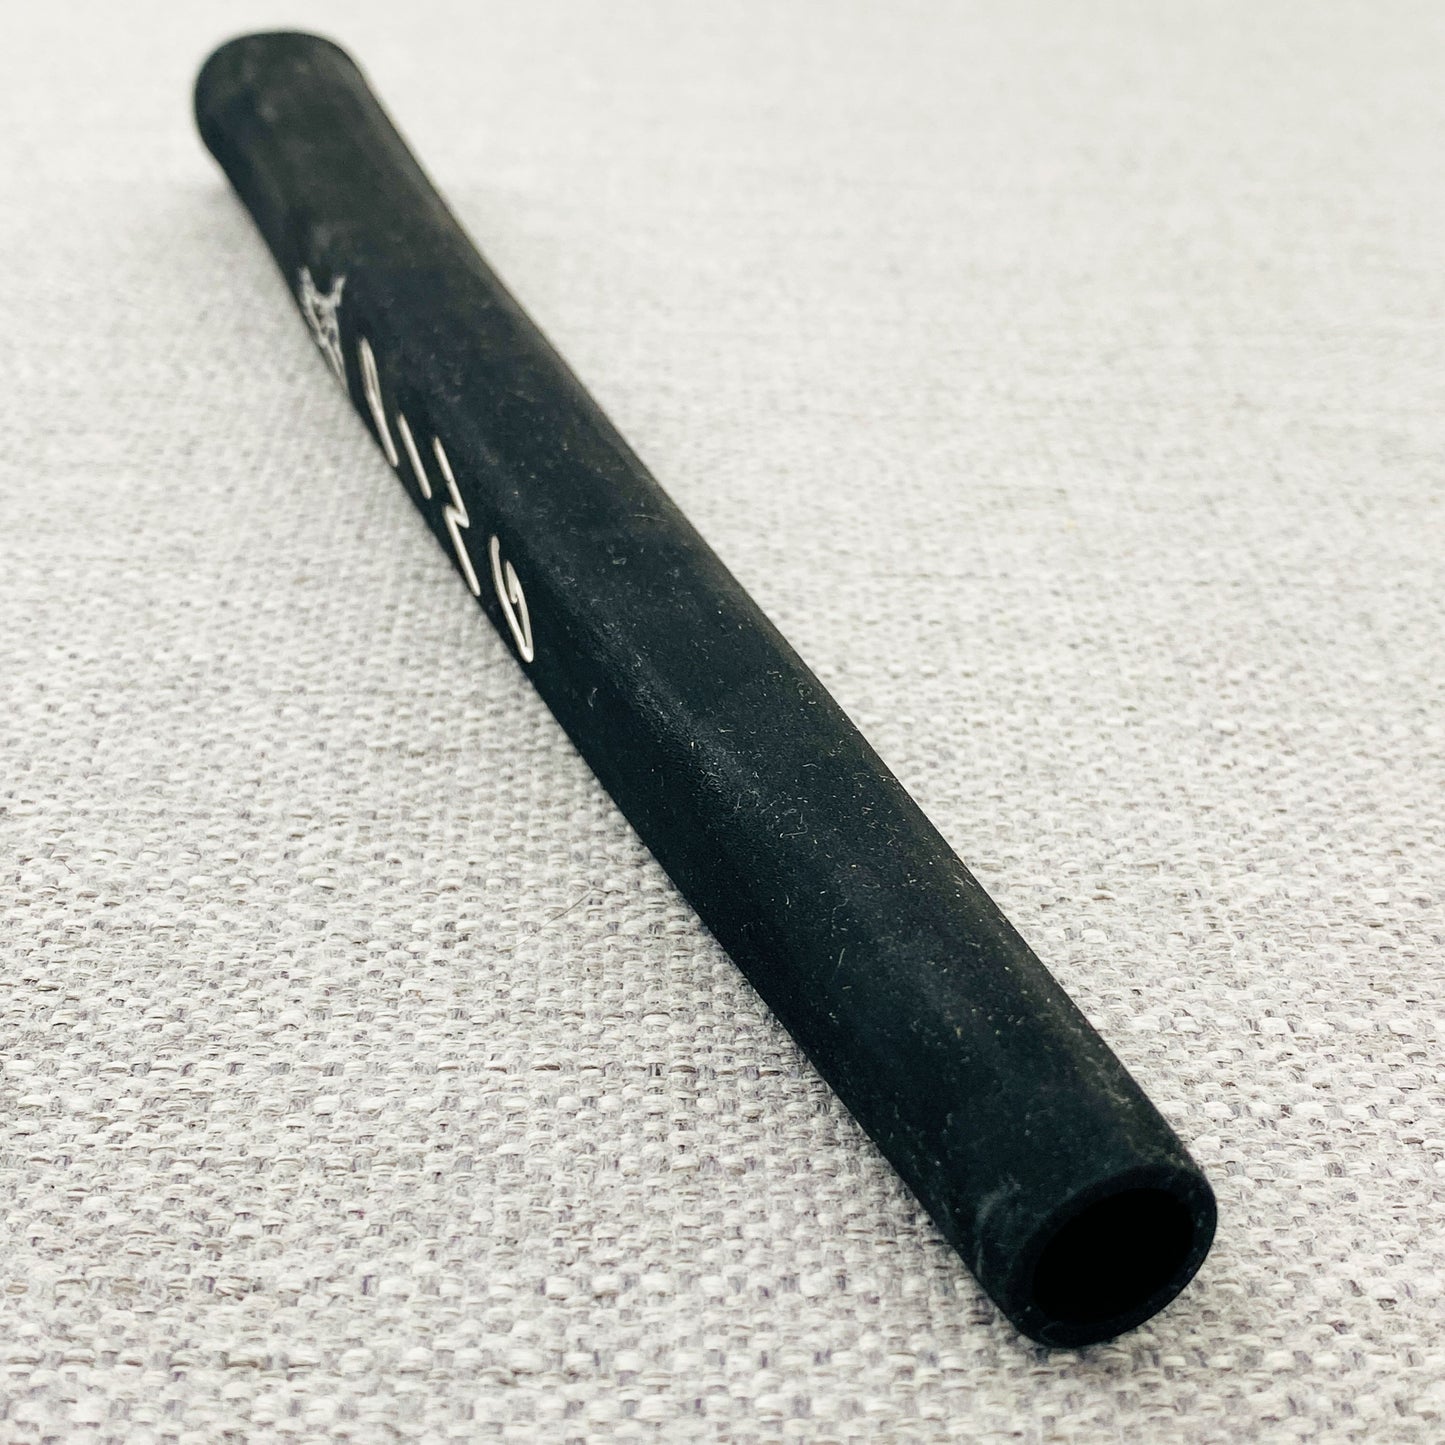 Golf Pride PING PP58 pistol putter grip. Black - Price includes fitment.